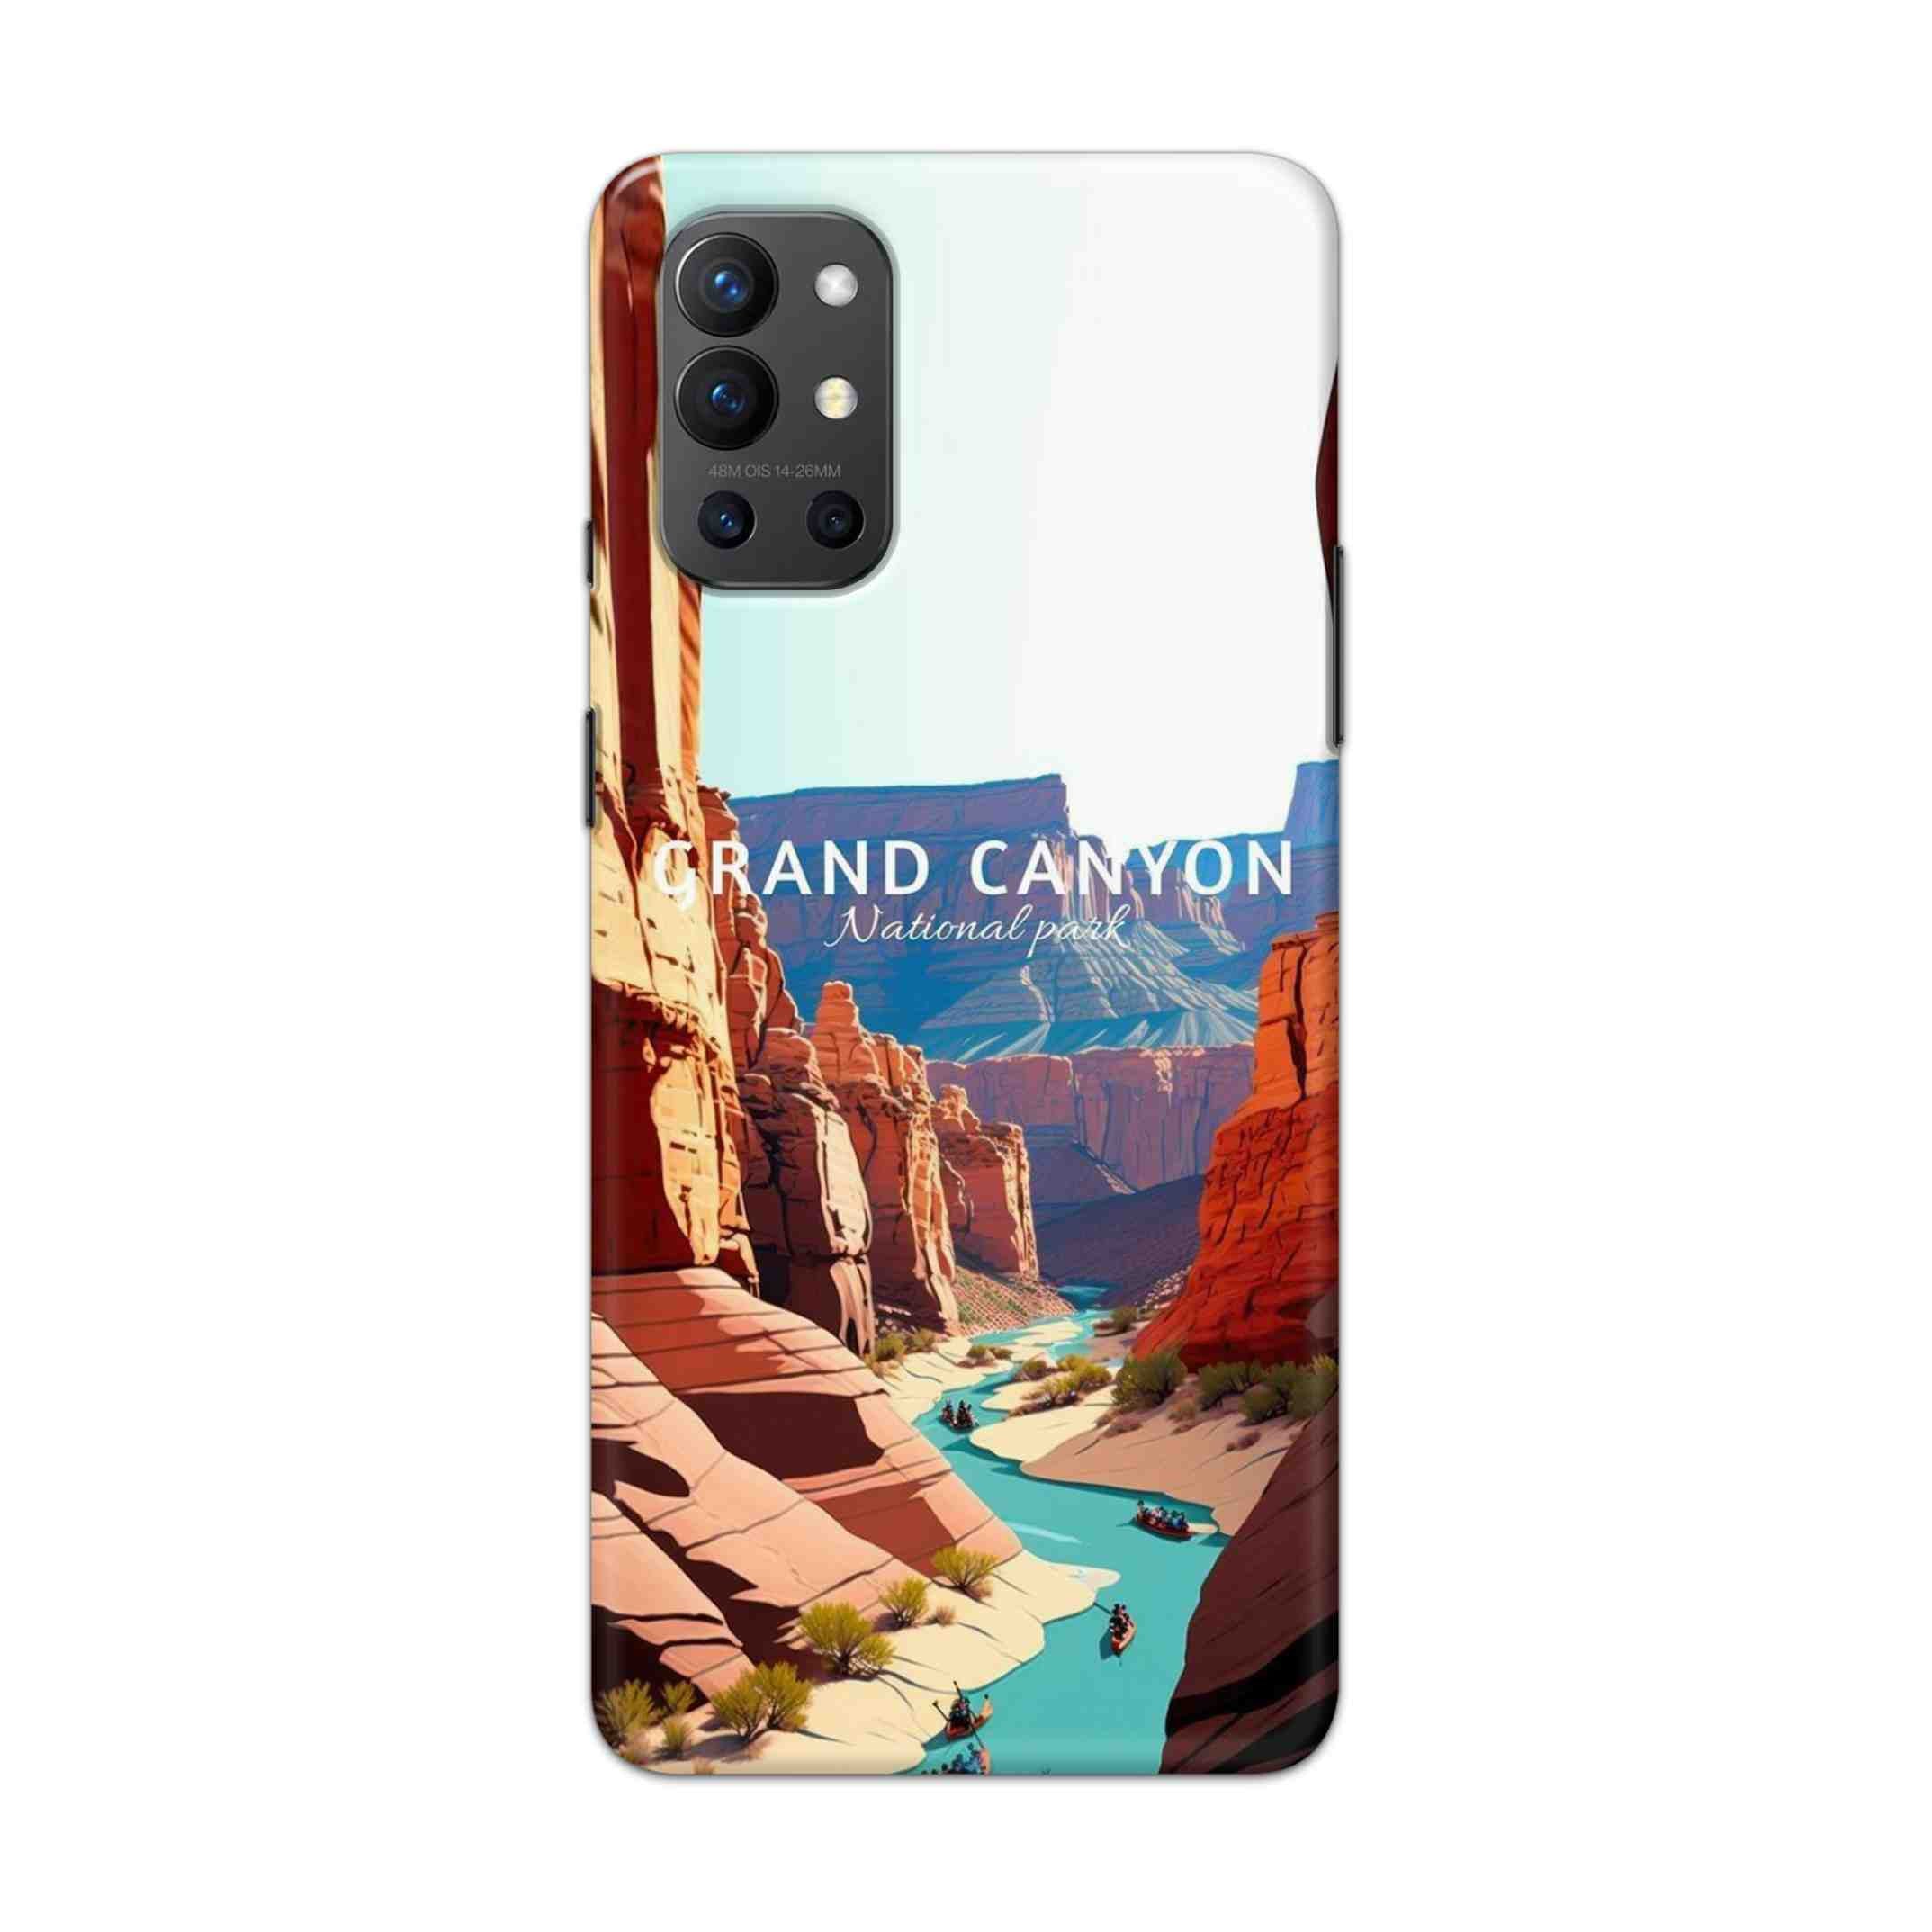 Buy Grand Canyan Hard Back Mobile Phone Case Cover For OnePlus 9R / 8T Online